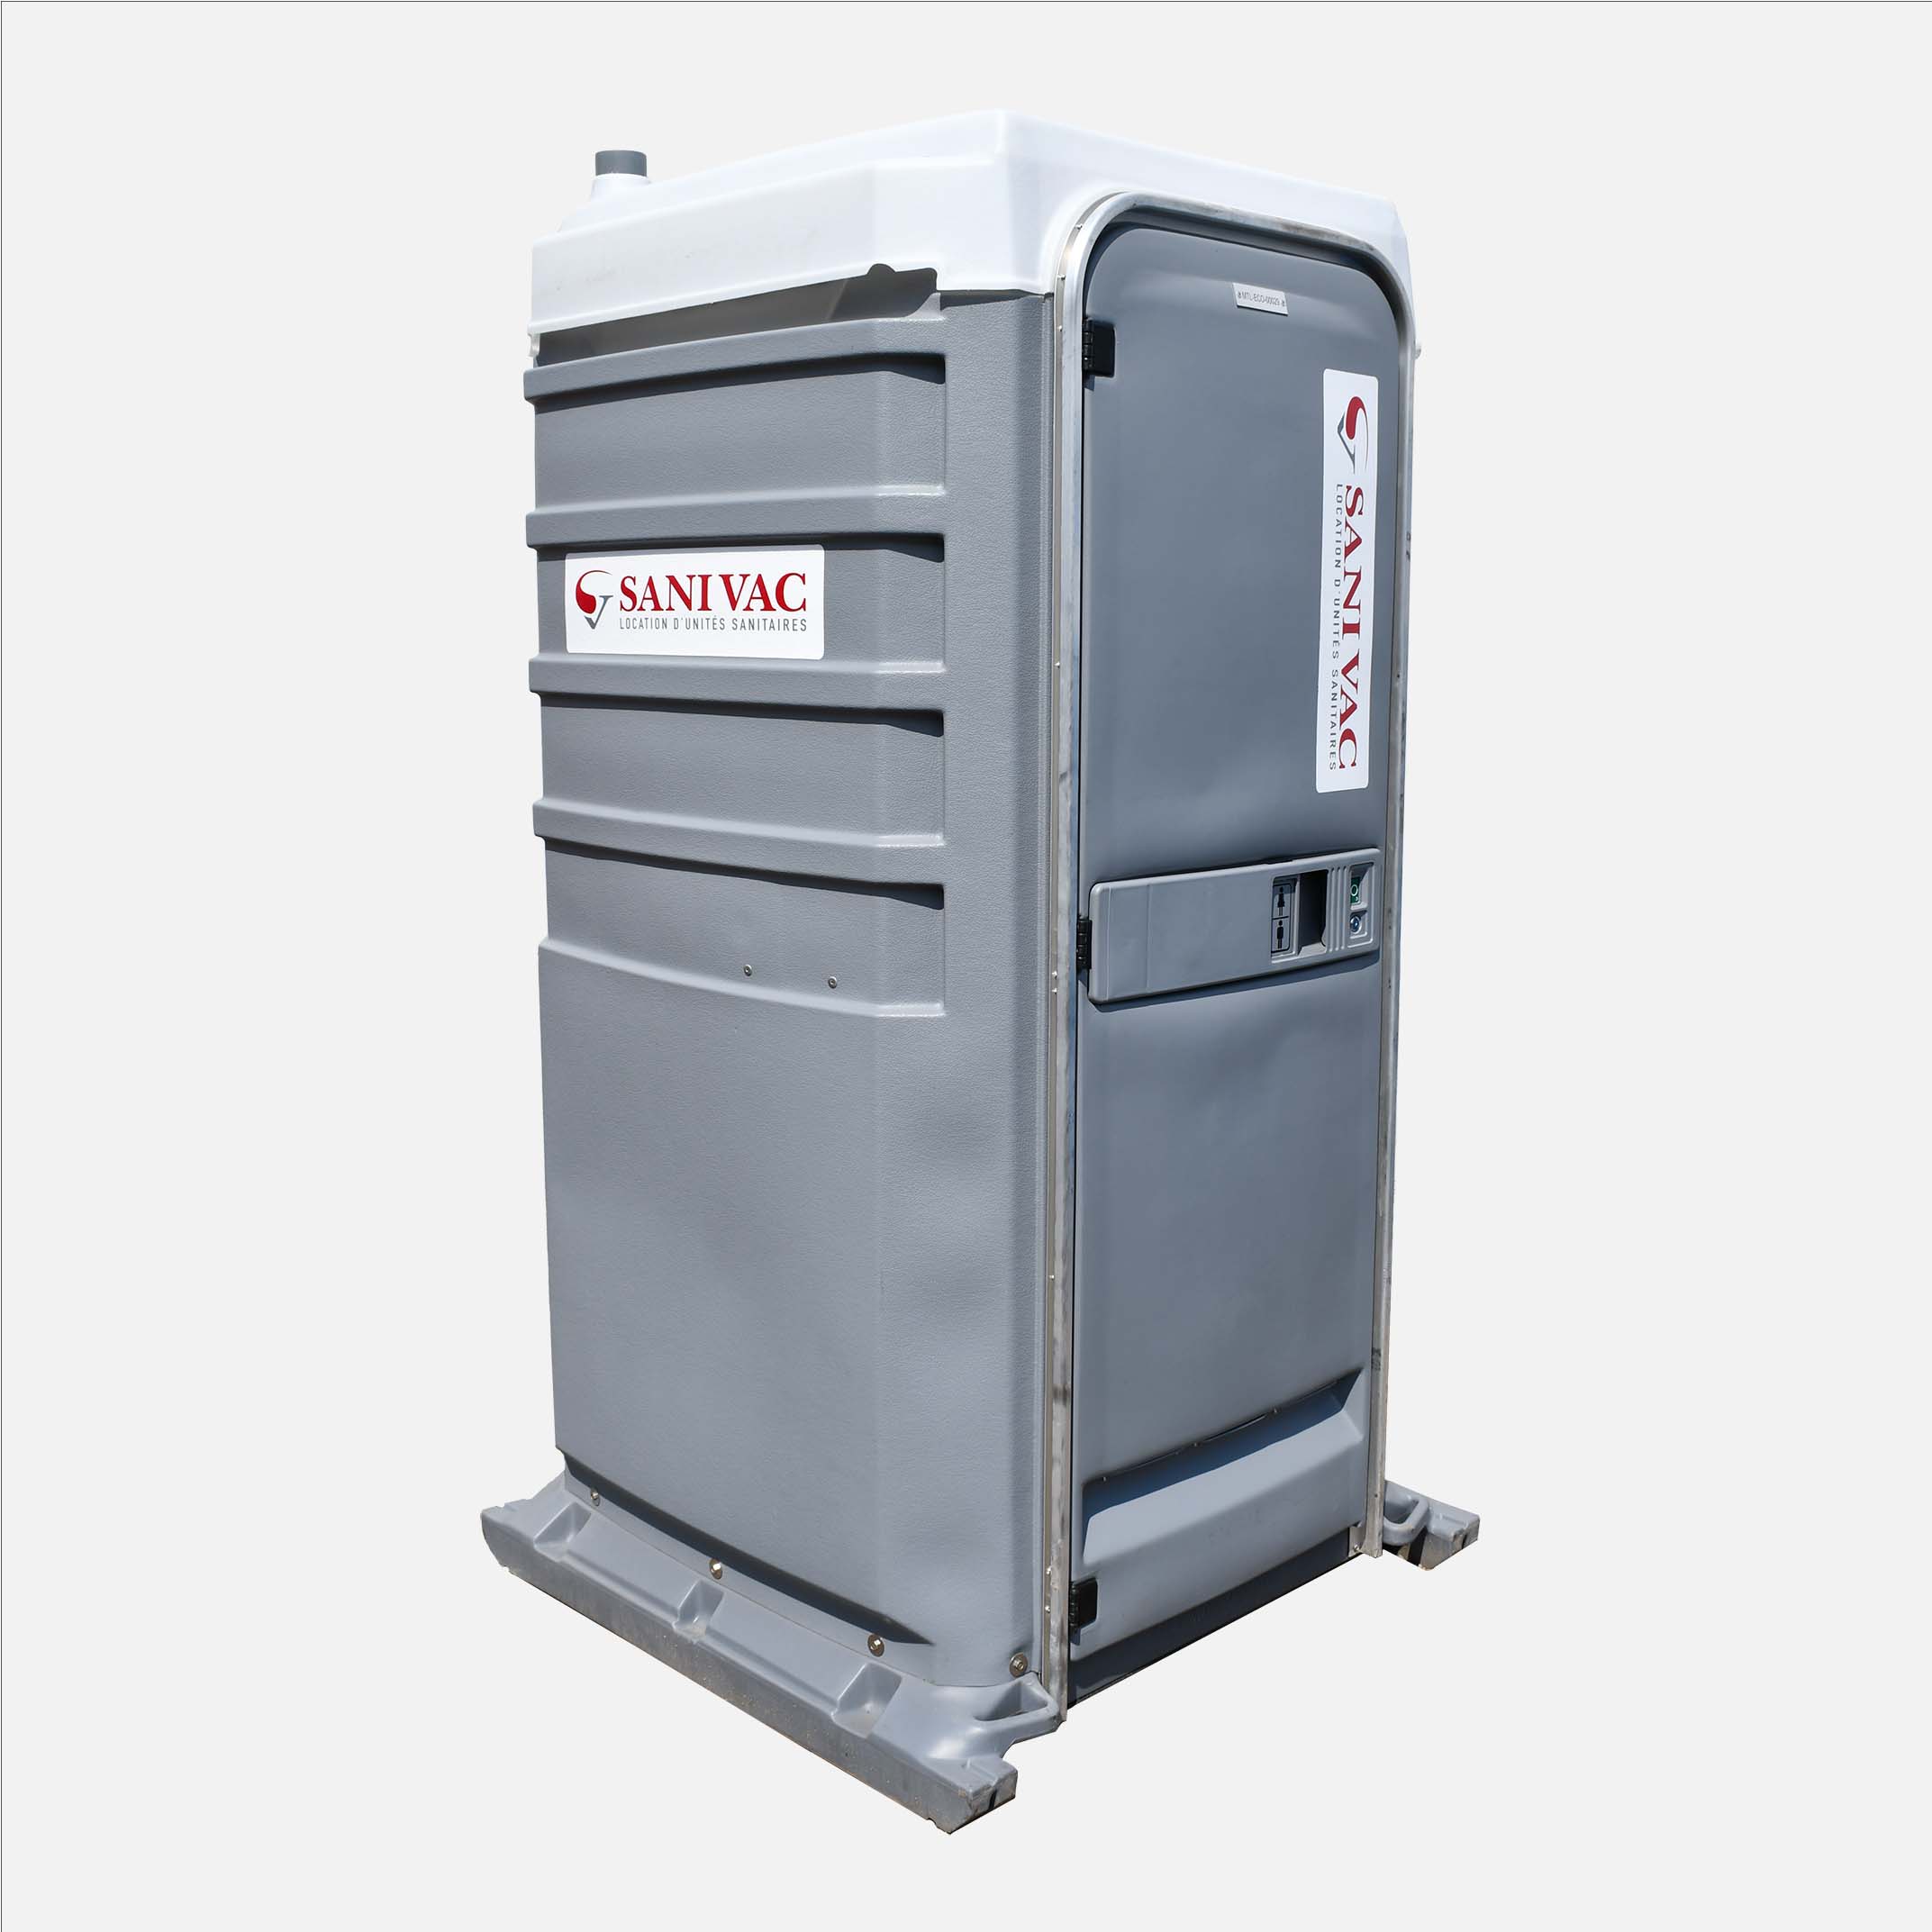 Regular portable toilet with sink - Sanivac